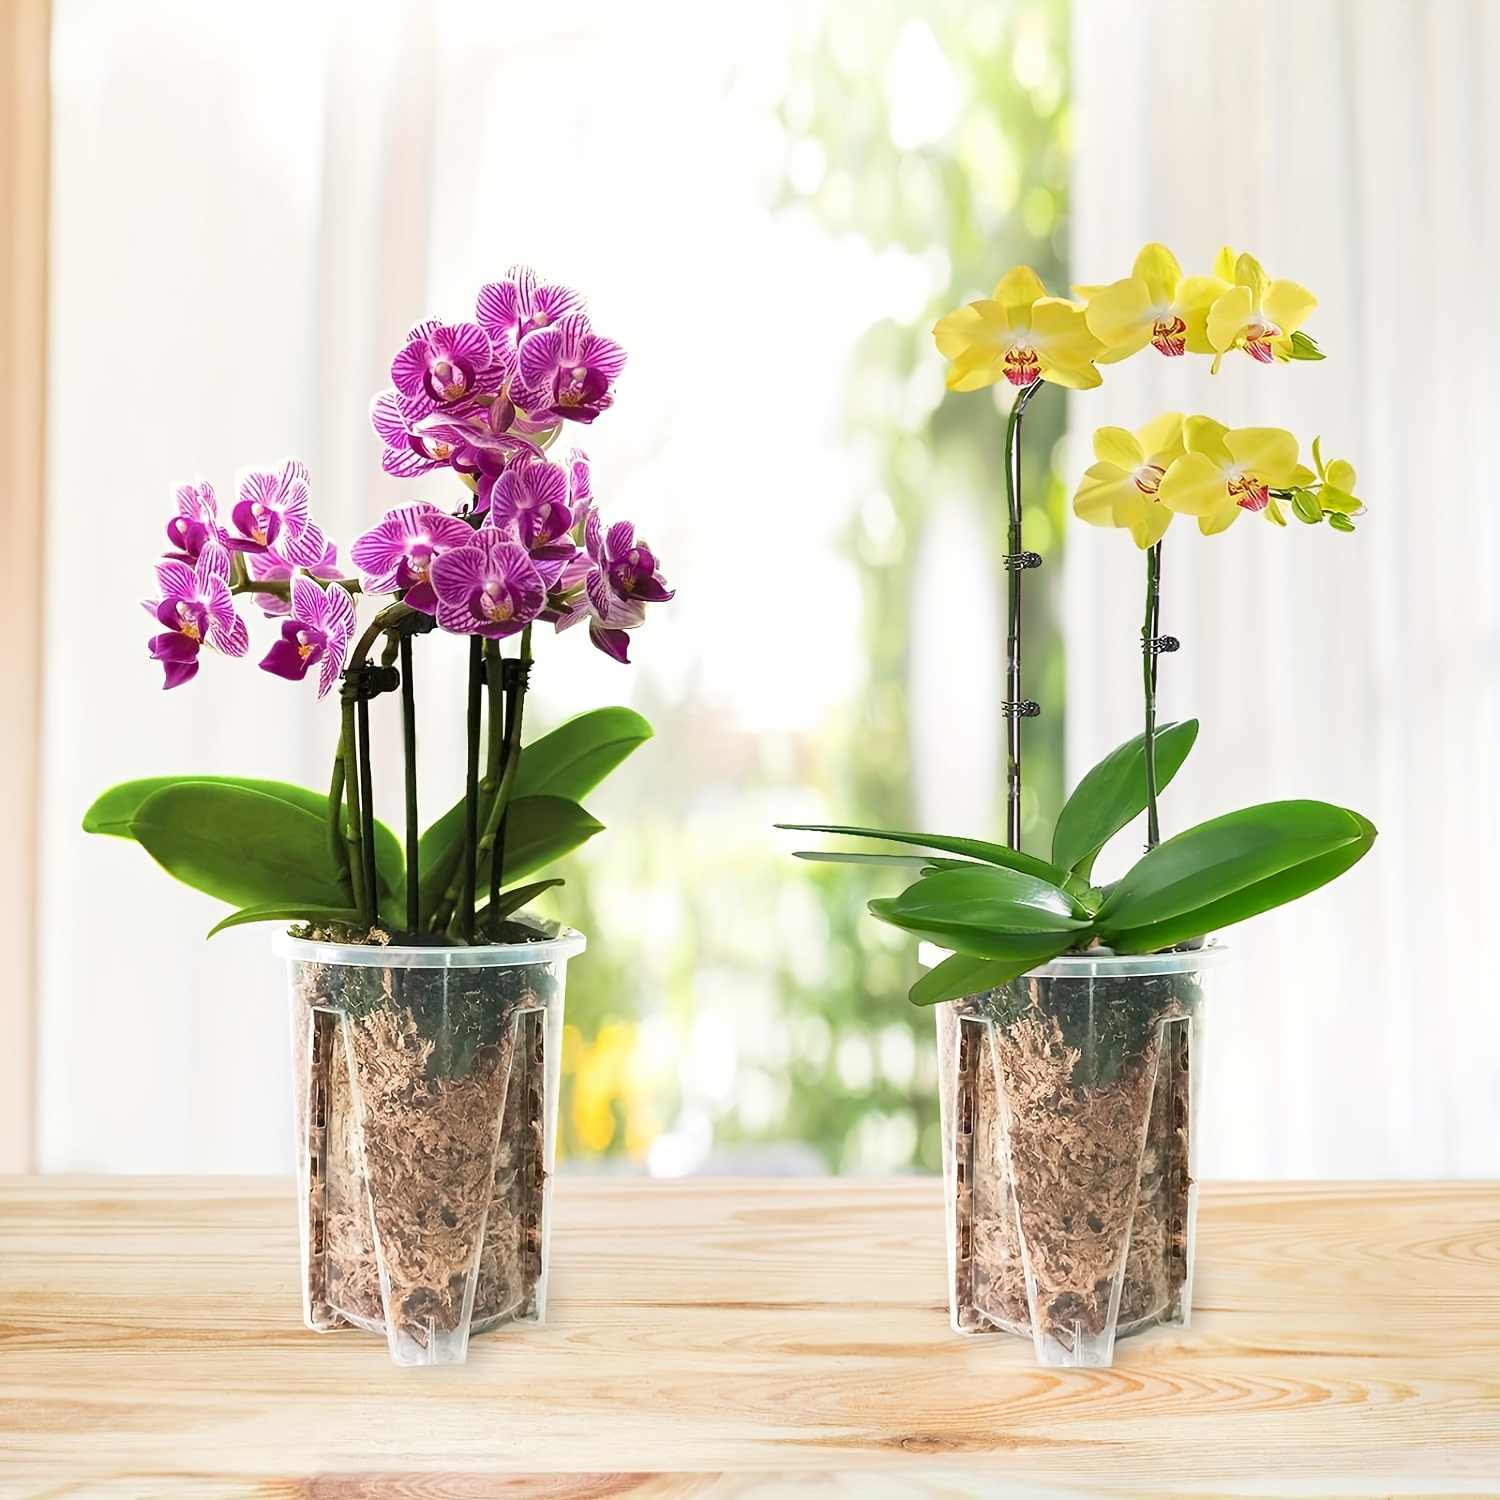 

5pcs Orchid Flower Pot, Orchid Flower Pot With Holes, Plastic Transparent Orchid Flower Pots, For Reintering, Indoor And Outdoor